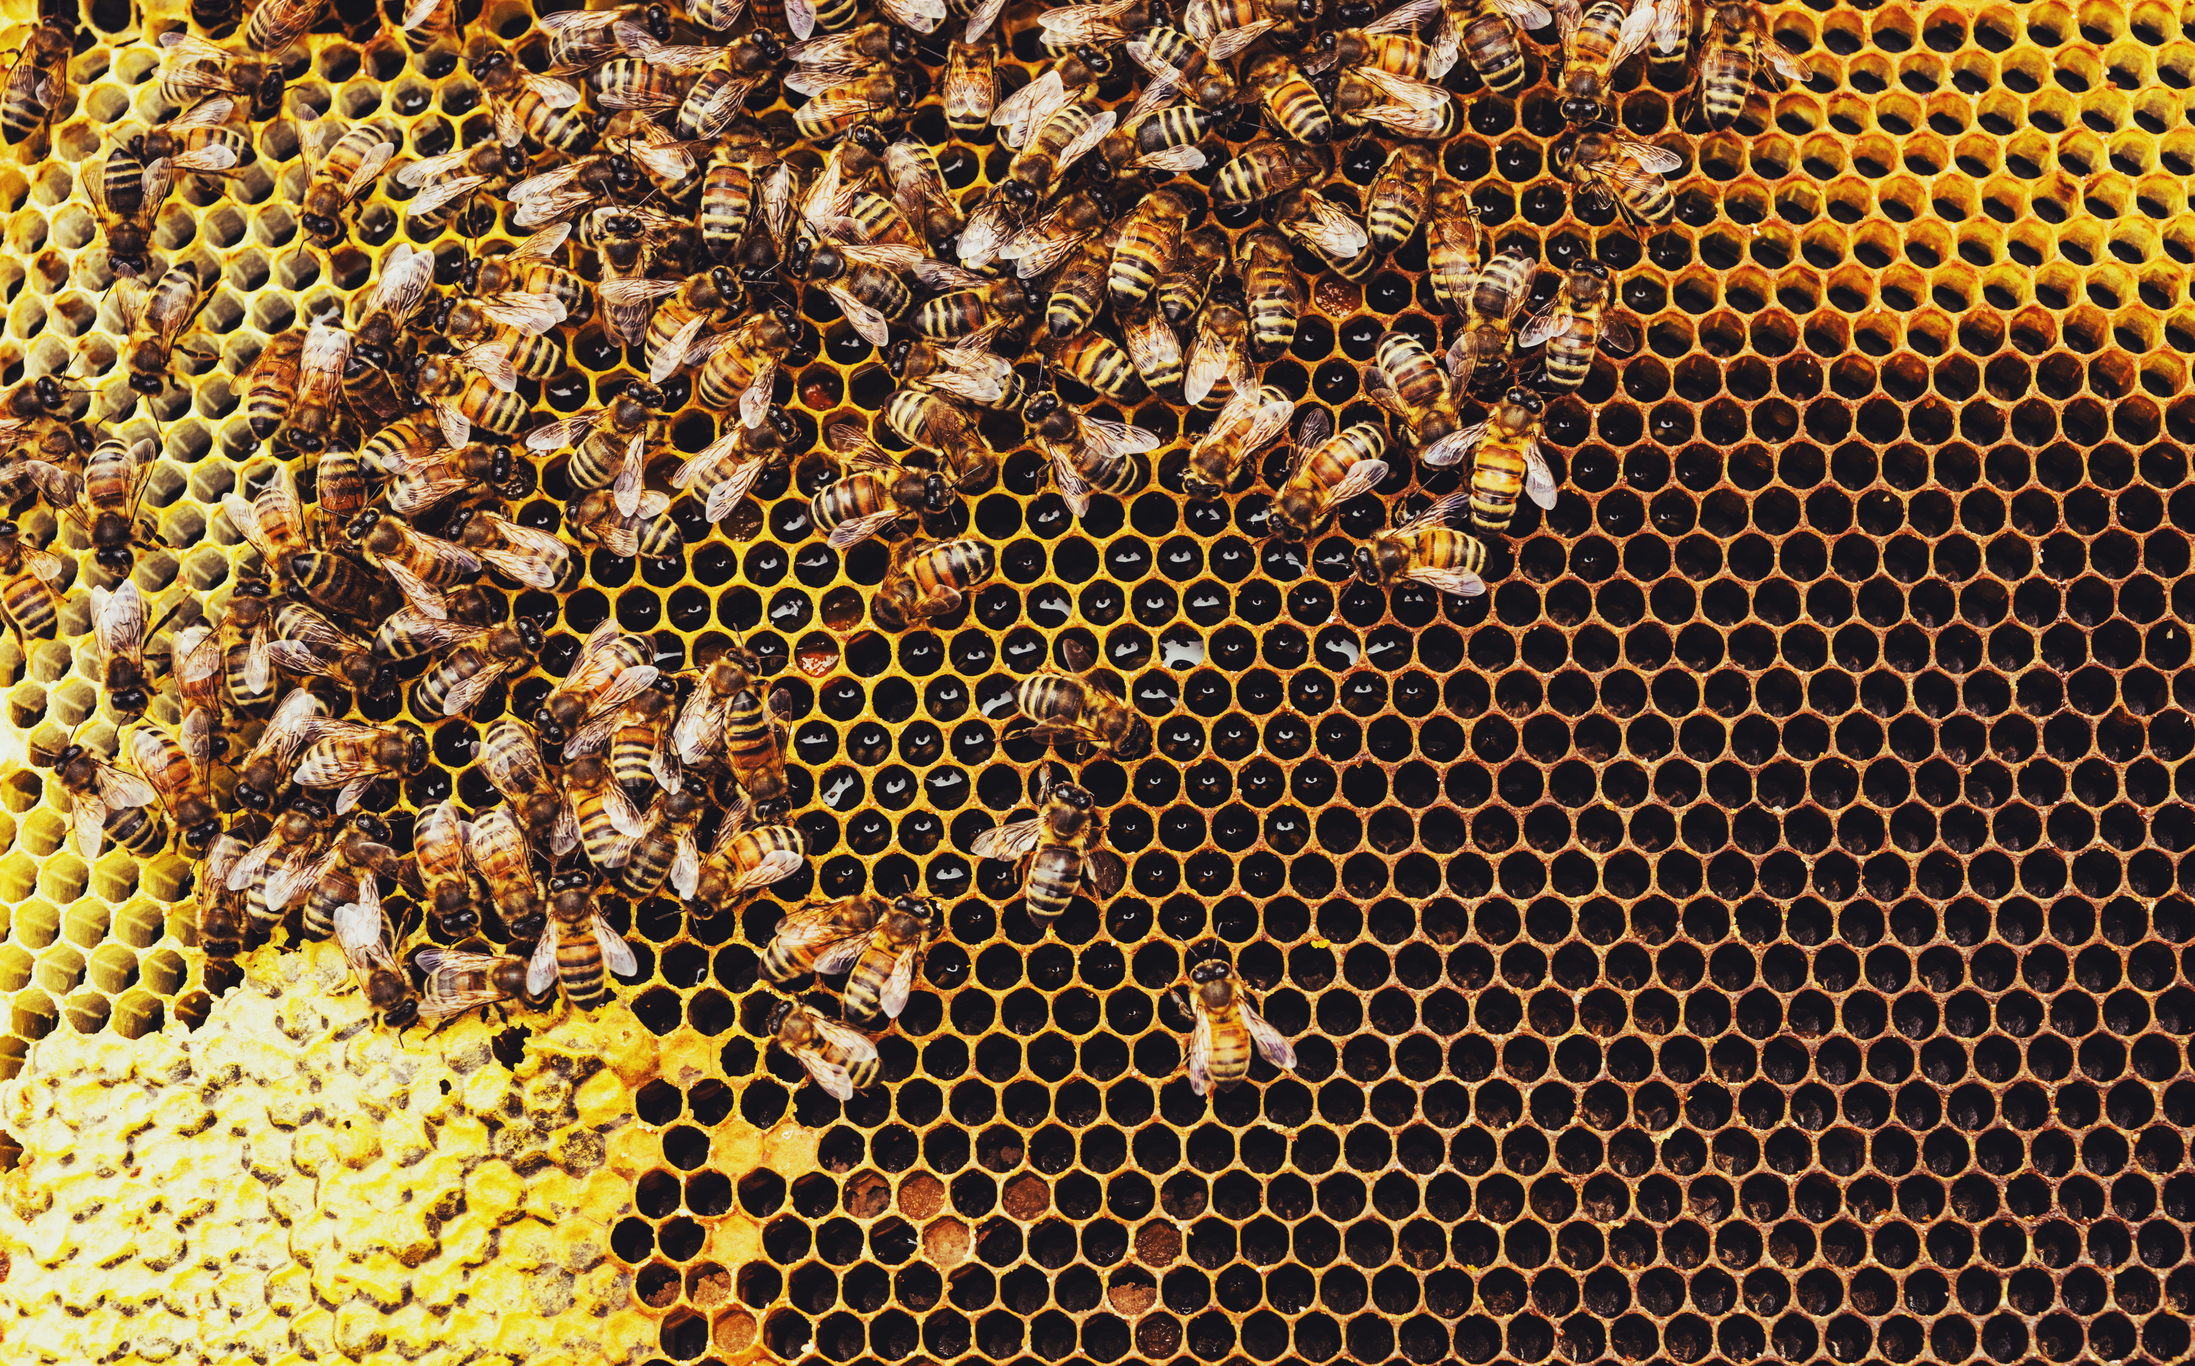 Honeybees Make Your Numbers Count!